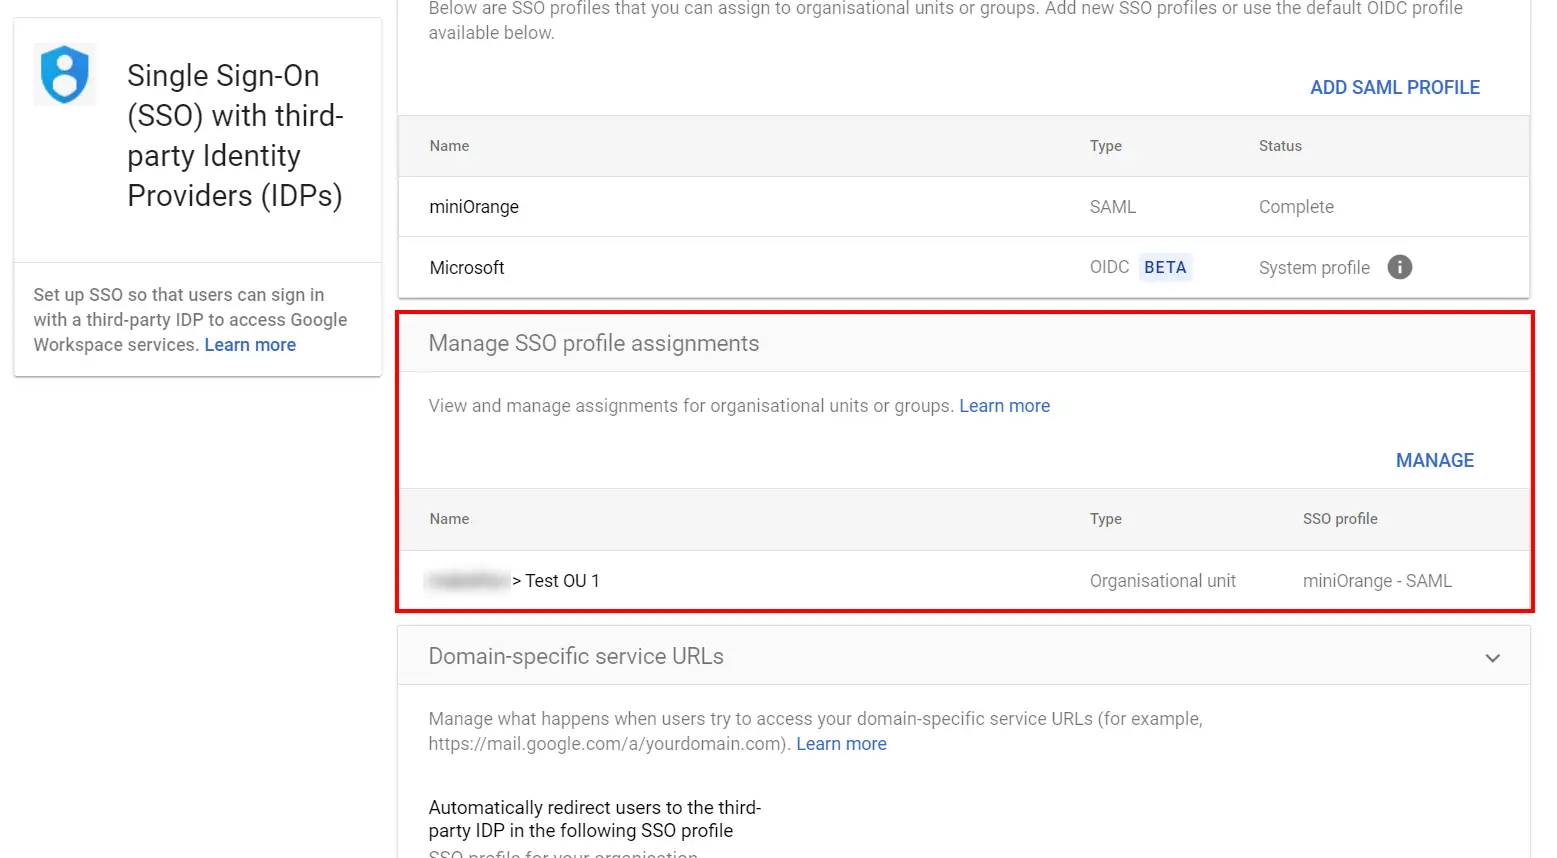 Gmail SSO (Single Sign-On) Assigning the SSO Profile to OU and Groups